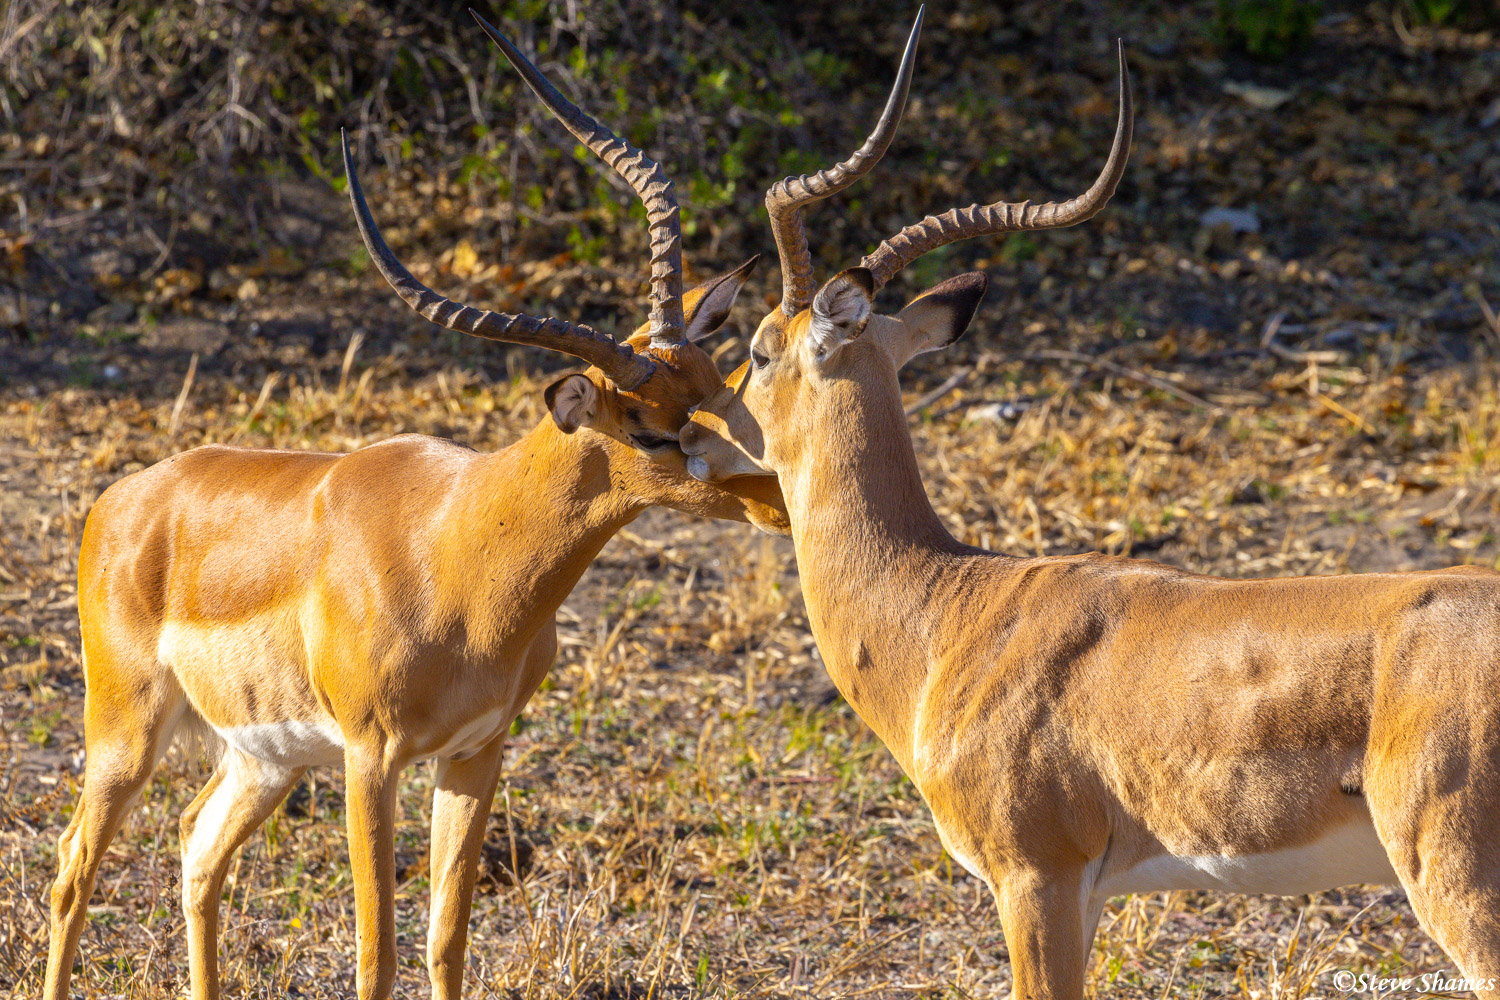 Male impalas in an affectionate nuzzling moment.